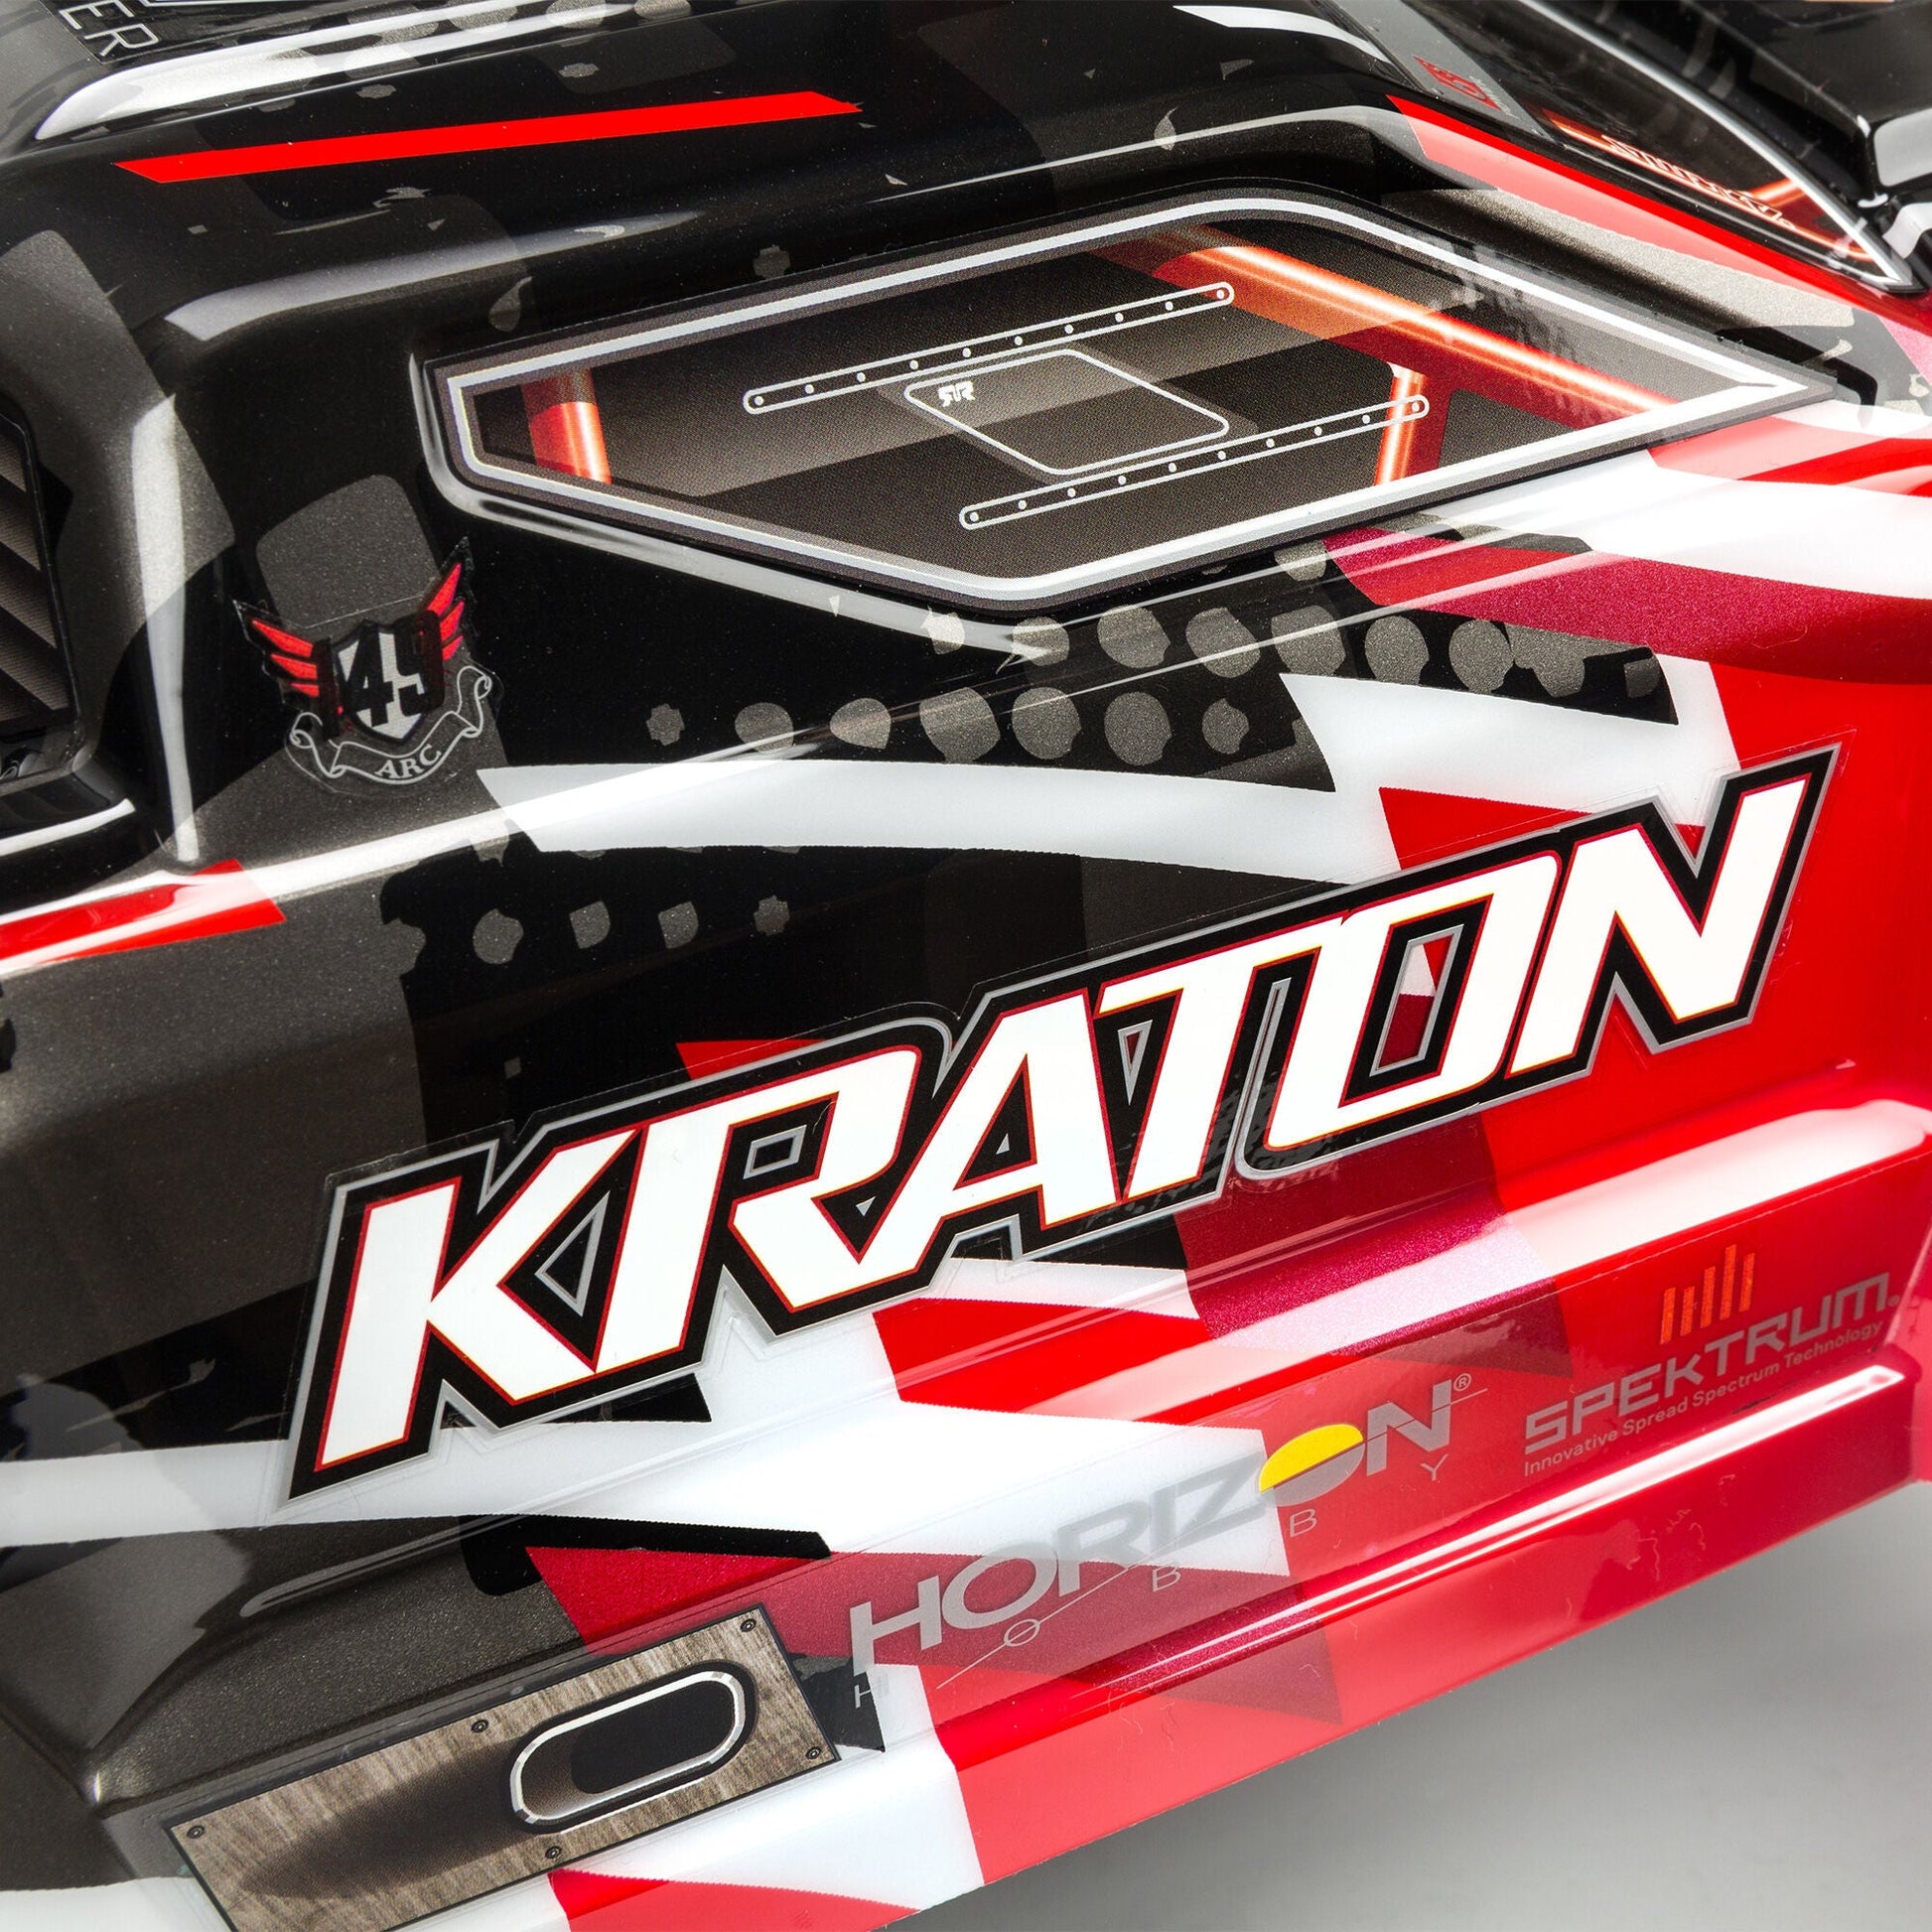 1/8 KRATON 6S V5 4WD BLX Speed Monster Truck with Spektrum Firma RTR, Red - Dirt Cheap RC SAVING YOU MONEY, ONE PART AT A TIME